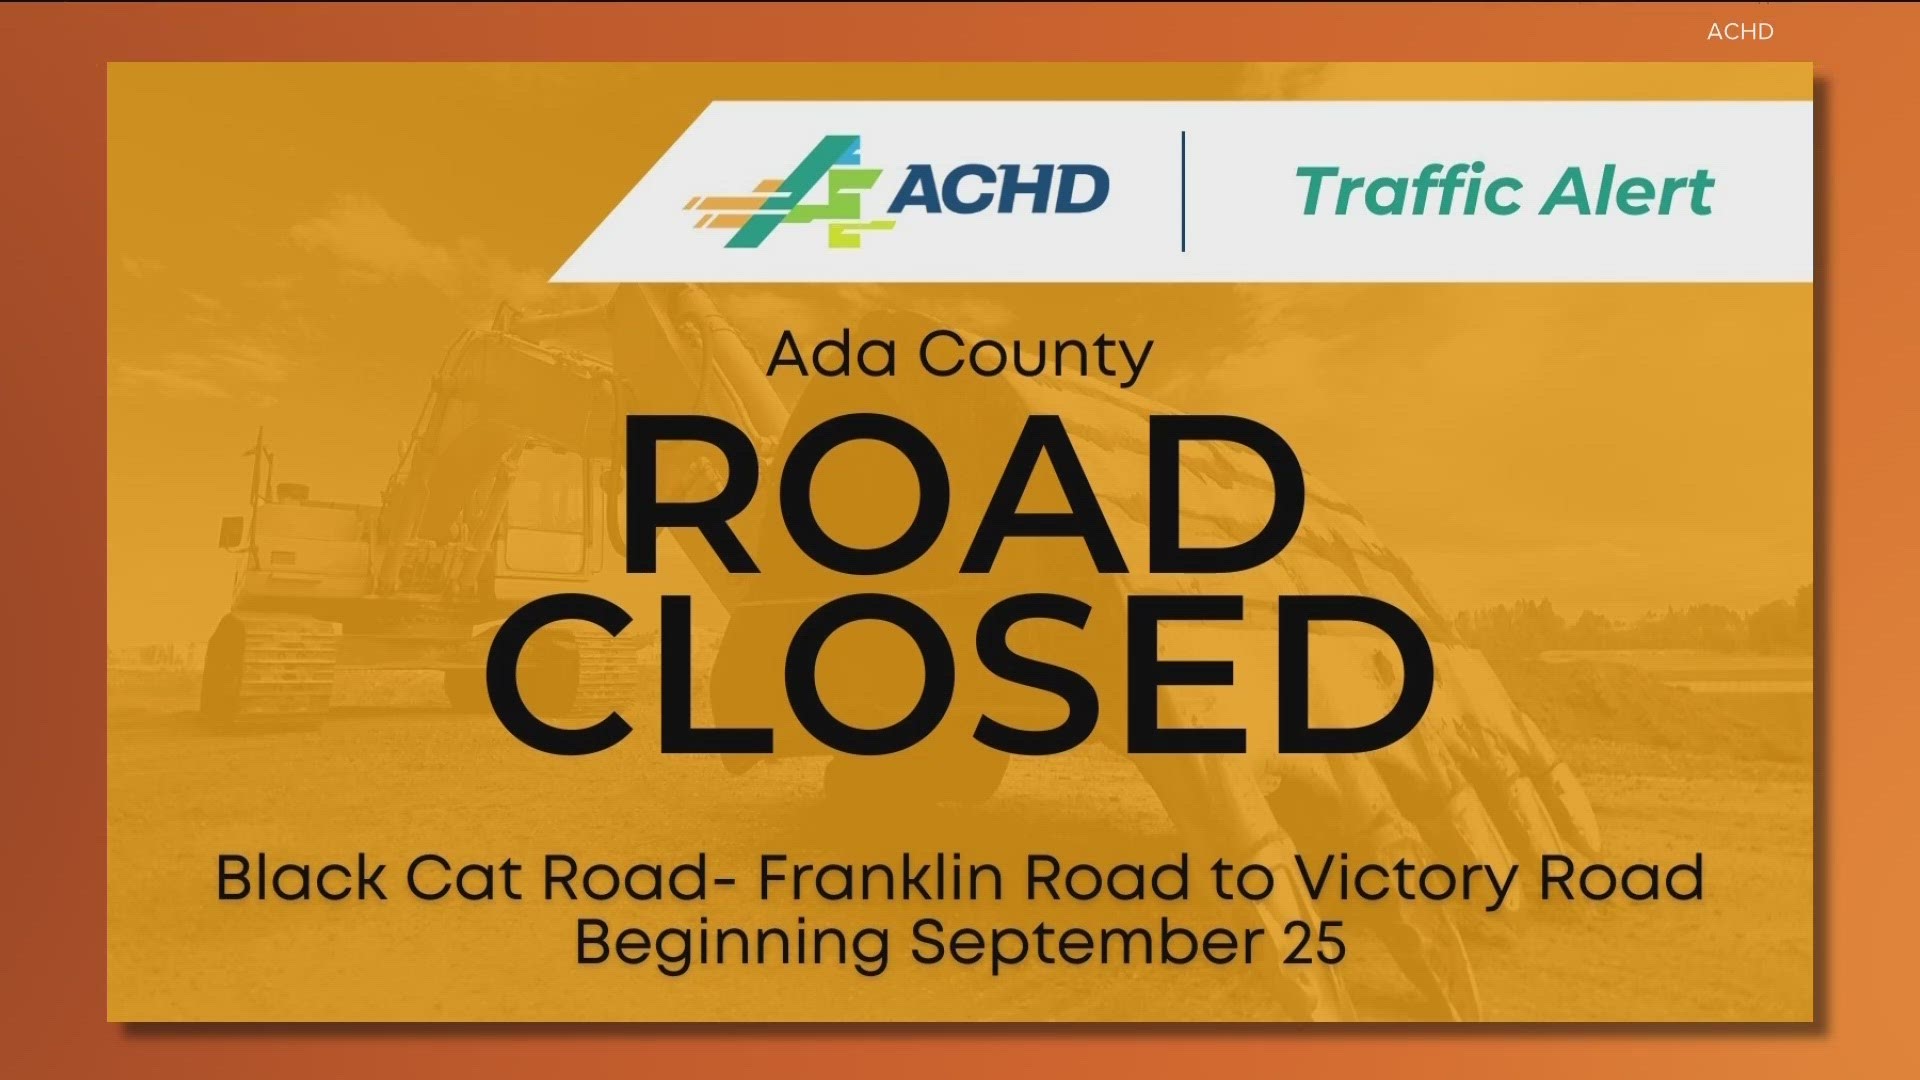 Black Cat Road has shut down starting Sept. 25, and will reopen in mid-November.